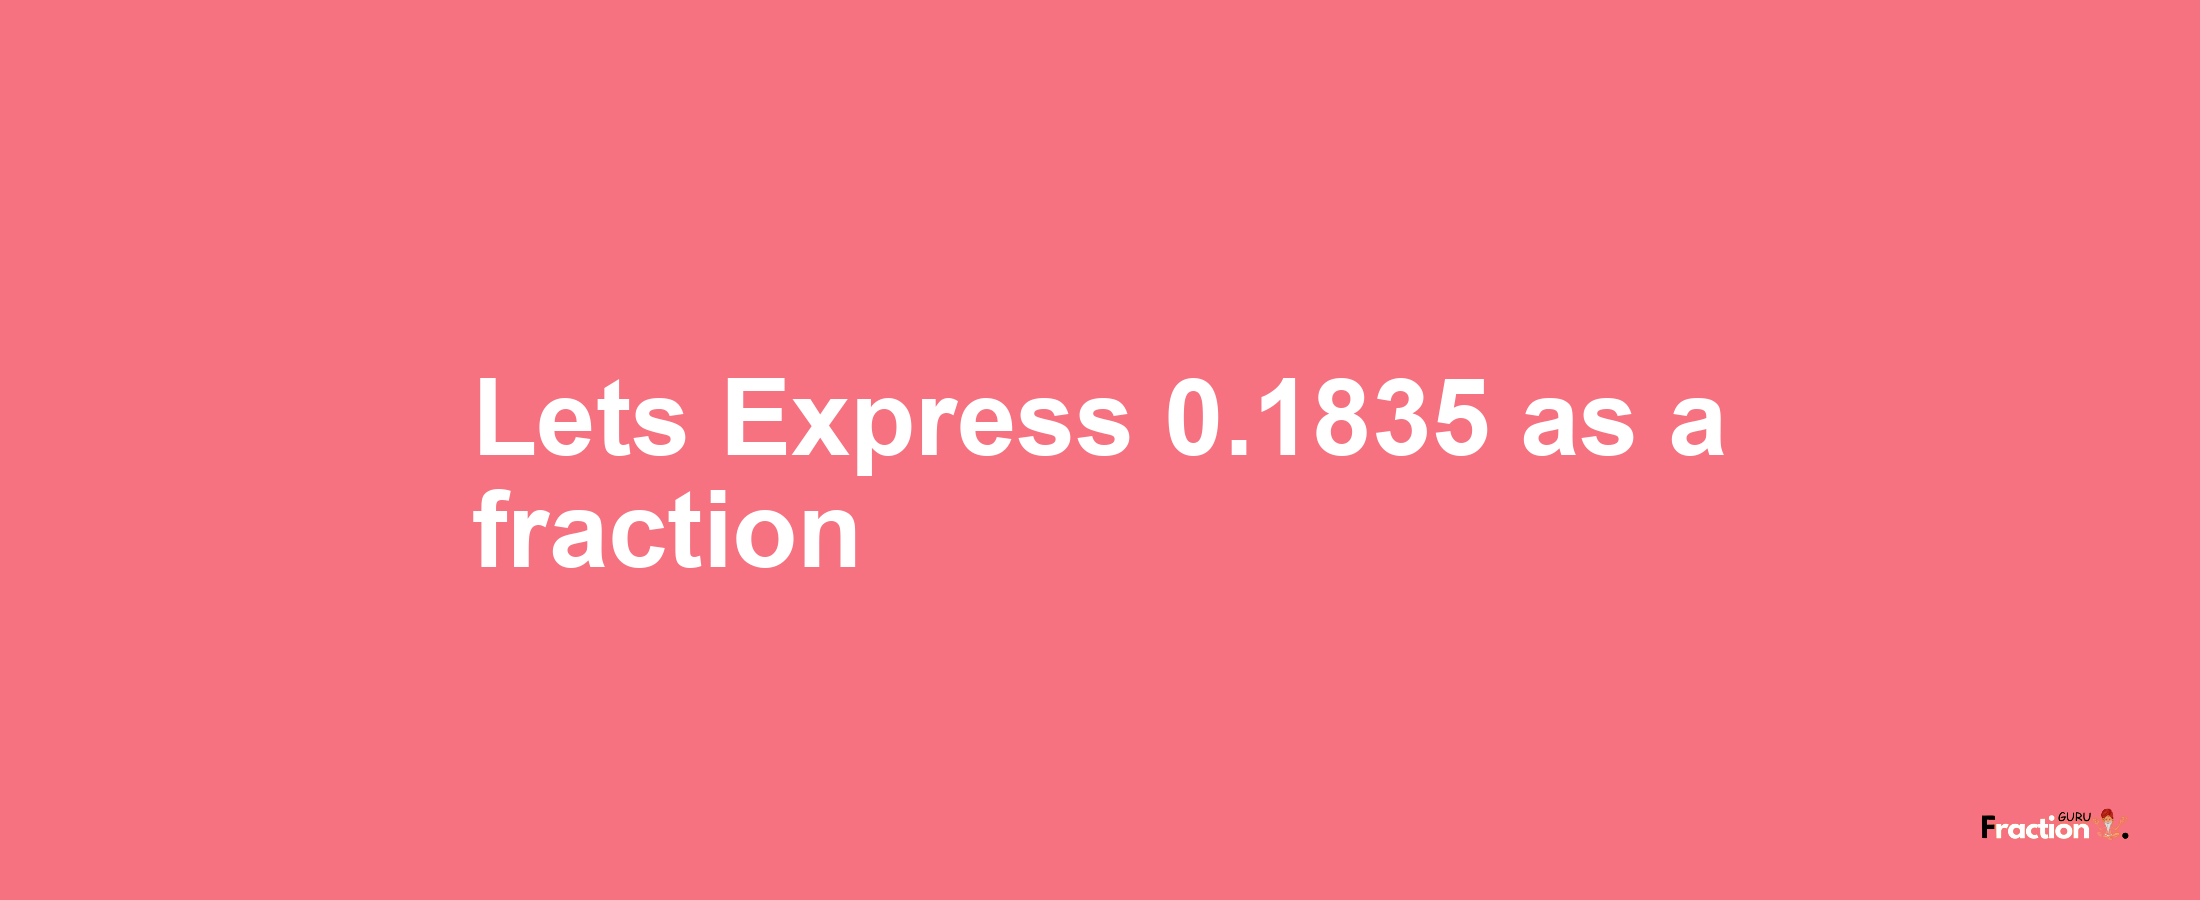 Lets Express 0.1835 as afraction